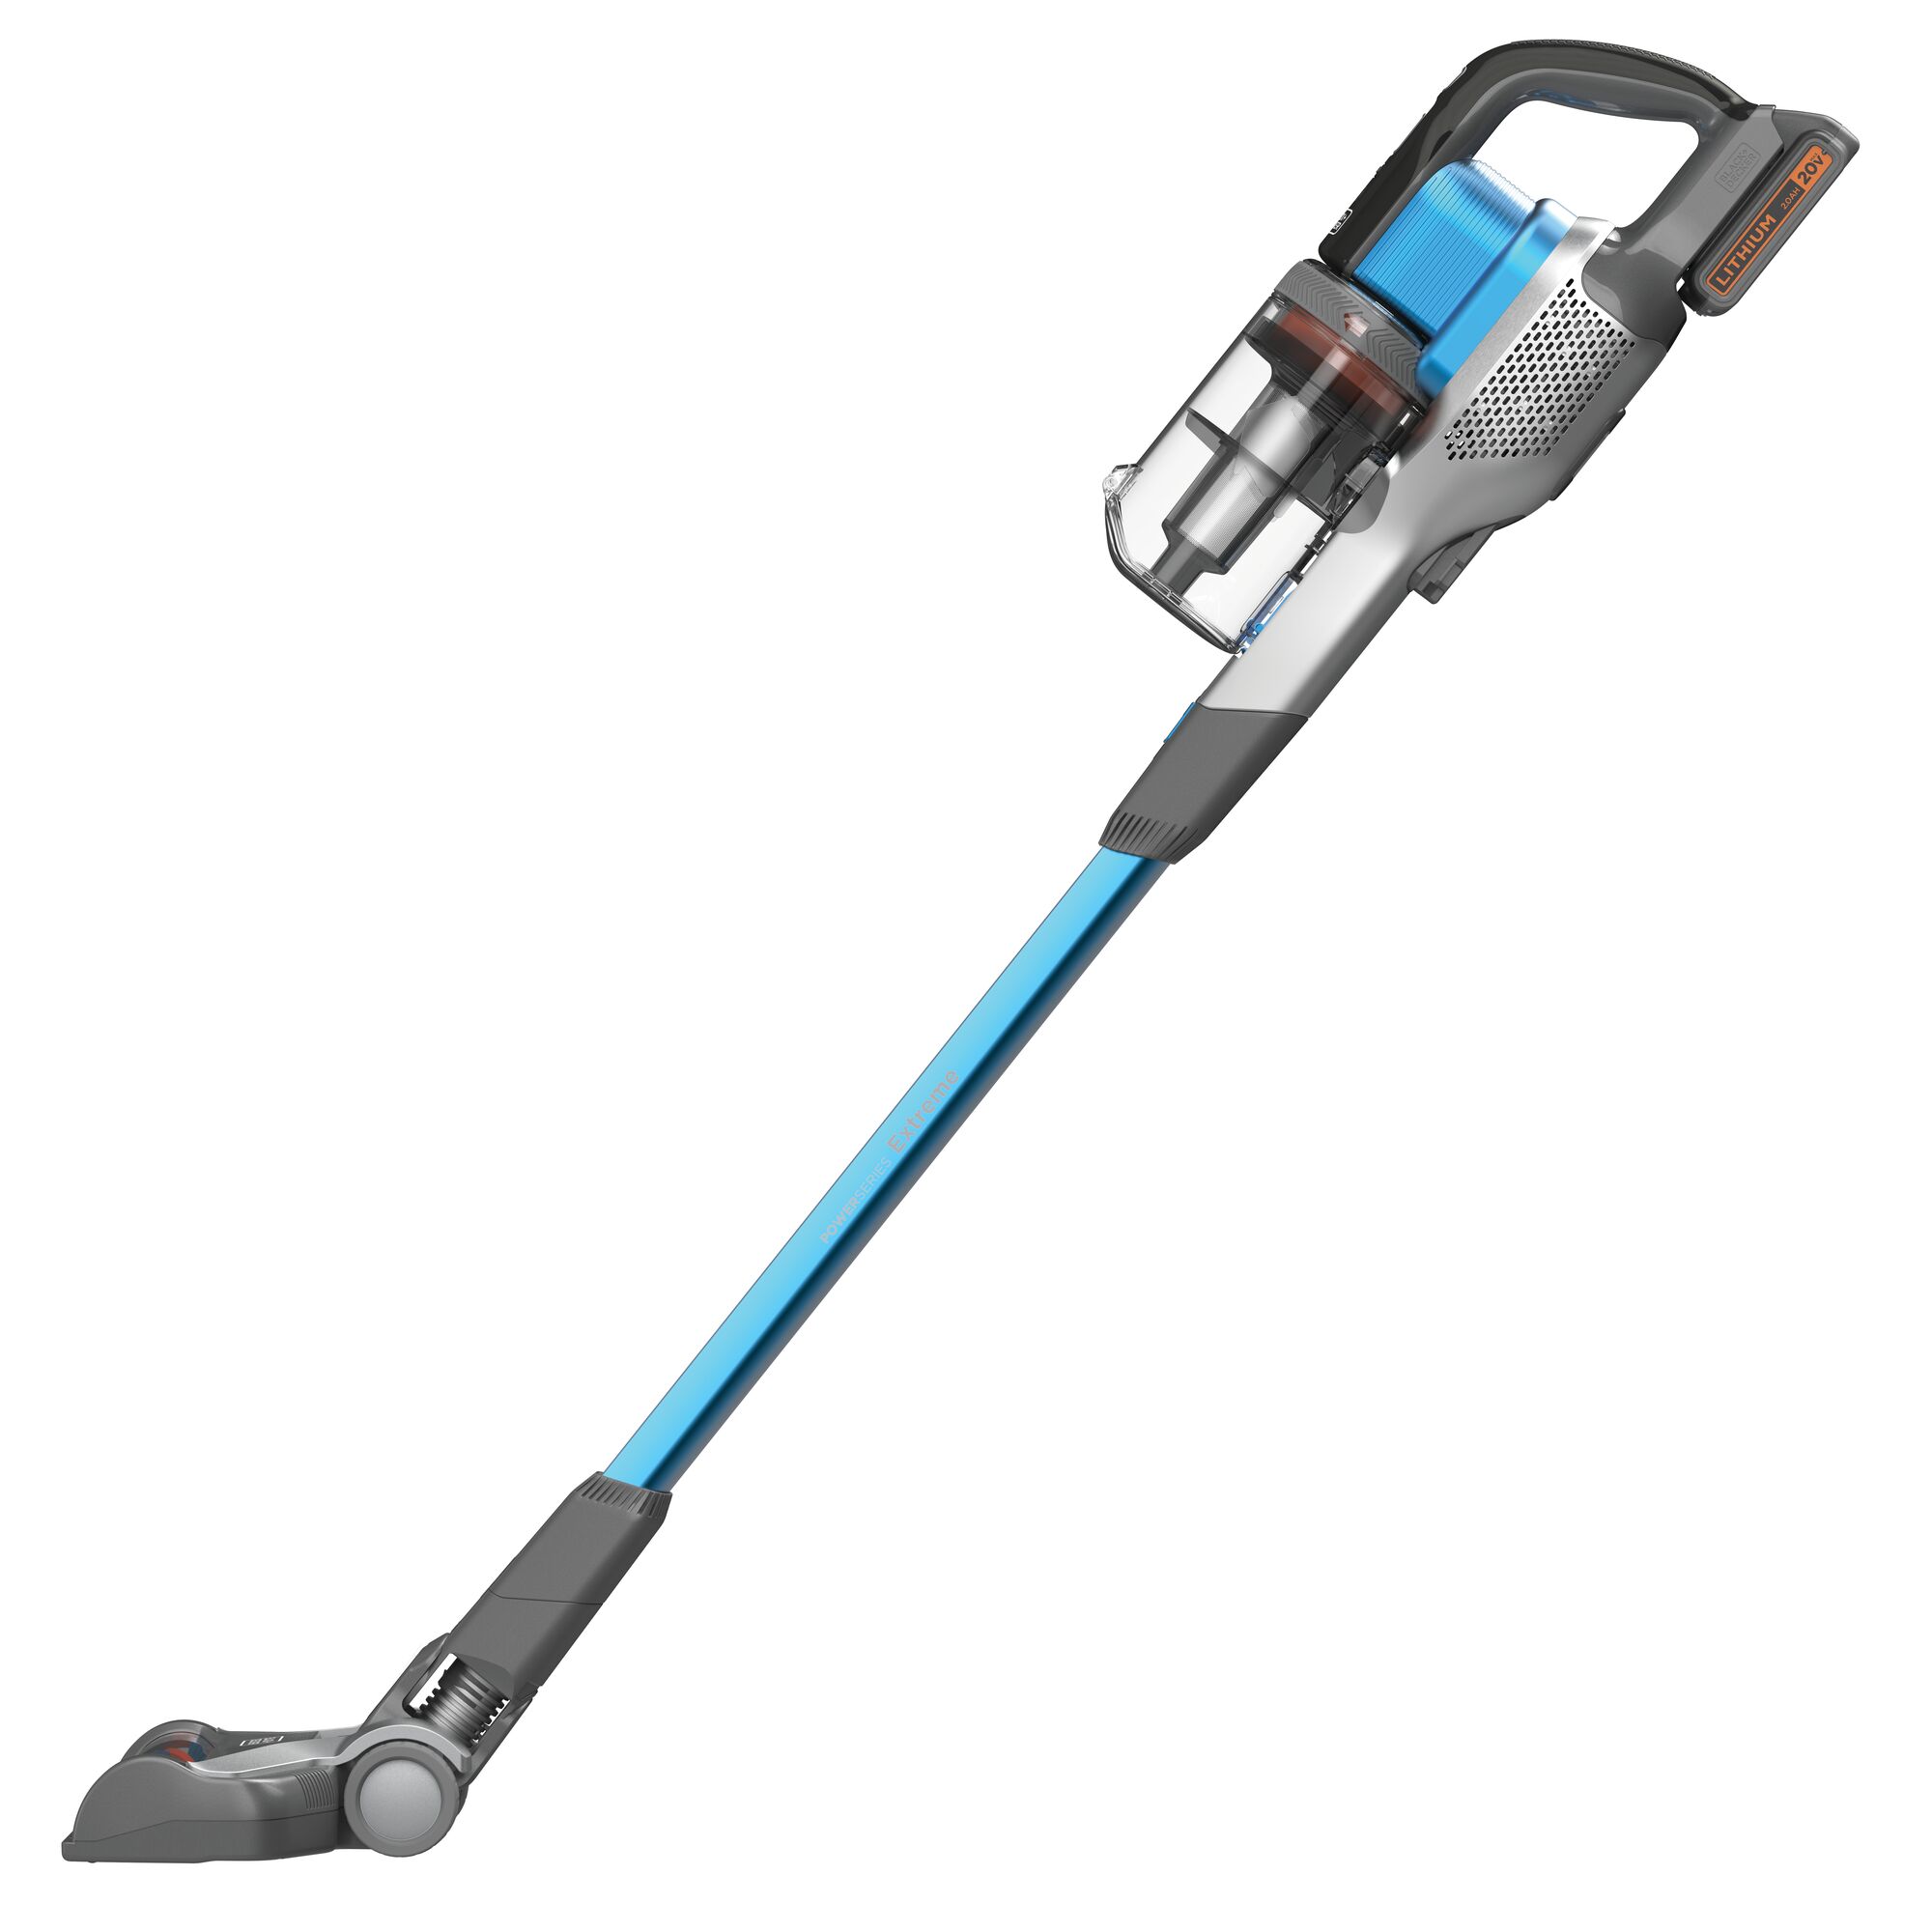 Profile of POWERSERIES Extreme Cordless Stick Vacuum Cleaner.